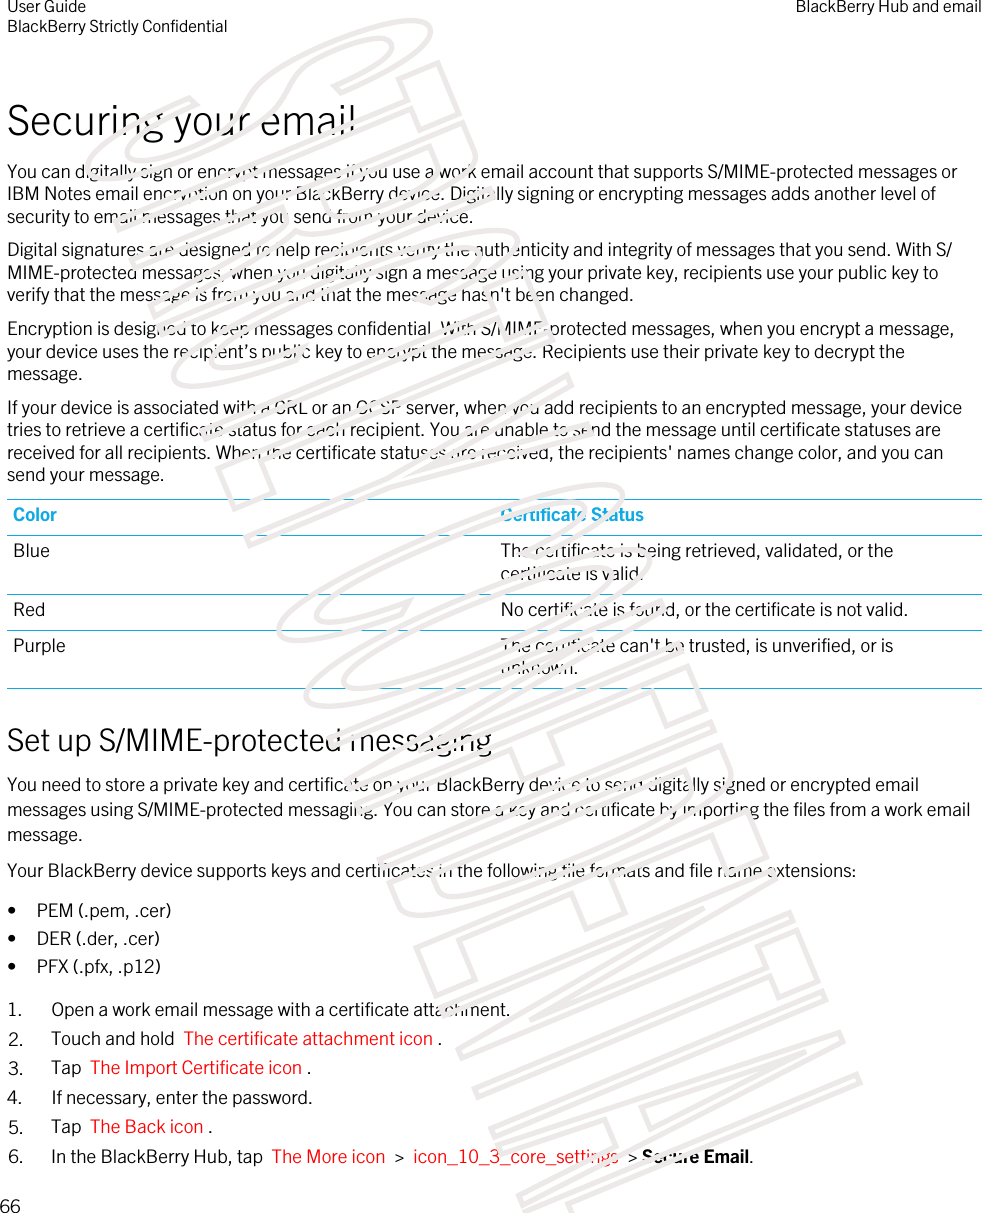 Securing your emailYou can digitally sign or encrypt messages if you use a work email account that supports S/MIME-protected messages or IBM Notes email encryption on your BlackBerry device. Digitally signing or encrypting messages adds another level of security to email messages that you send from your device.Digital signatures are designed to help recipients verify the authenticity and integrity of messages that you send. With S/MIME-protected messages, when you digitally sign a message using your private key, recipients use your public key to verify that the message is from you and that the message hasn&apos;t been changed.Encryption is designed to keep messages confidential. With S/MIME-protected messages, when you encrypt a message, your device uses the recipient’s public key to encrypt the message. Recipients use their private key to decrypt the message.If your device is associated with a CRL or an OCSP server, when you add recipients to an encrypted message, your device tries to retrieve a certificate status for each recipient. You are unable to send the message until certificate statuses are received for all recipients. When the certificate statuses are received, the recipients&apos; names change color, and you can send your message.Color Certificate StatusBlue The certificate is being retrieved, validated, or the certificate is valid.Red No certificate is found, or the certificate is not valid.Purple The certificate can&apos;t be trusted, is unverified, or is unknown.Set up S/MIME-protected messagingYou need to store a private key and certificate on your BlackBerry device to send digitally signed or encrypted email messages using S/MIME-protected messaging. You can store a key and certificate by importing the files from a work email message.Your BlackBerry device supports keys and certificates in the following file formats and file name extensions:• PEM (.pem, .cer)• DER (.der, .cer)• PFX (.pfx, .p12)1. Open a work email message with a certificate attachment.2. Touch and hold  The certificate attachment icon . 3. Tap  The Import Certificate icon .4. If necessary, enter the password.5. Tap  The Back icon .6. In the BlackBerry Hub, tap  The More icon  &gt;  icon_10_3_core_settings  &gt; Secure Email.User GuideBlackBerry Strictly ConfidentialBlackBerry Hub and email66STRICTLY CONFIDENTIAL